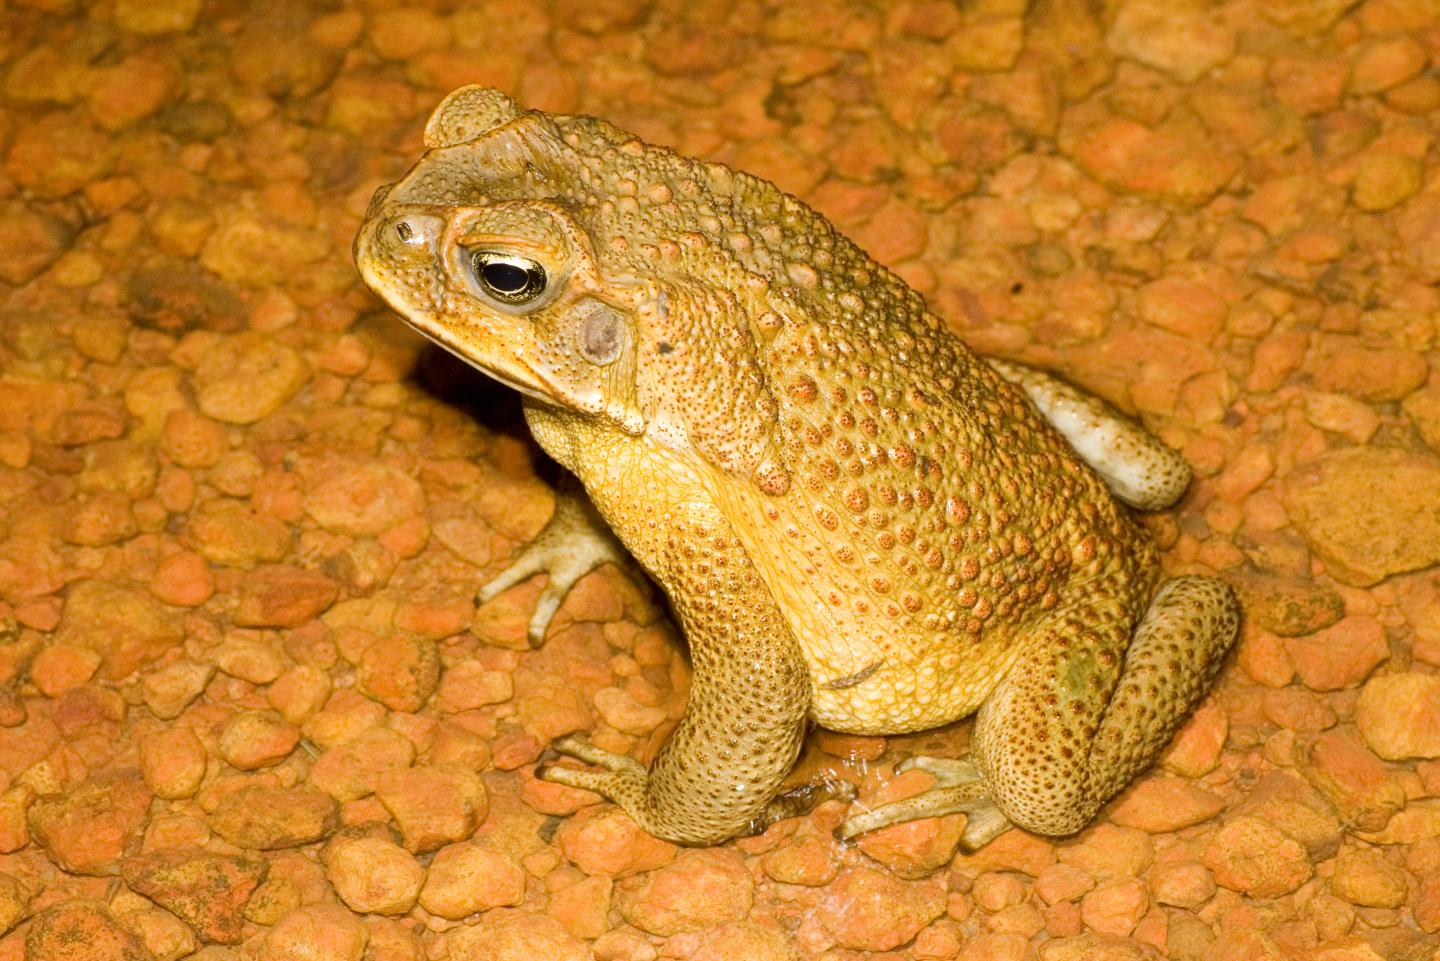 A Male Cane Toad